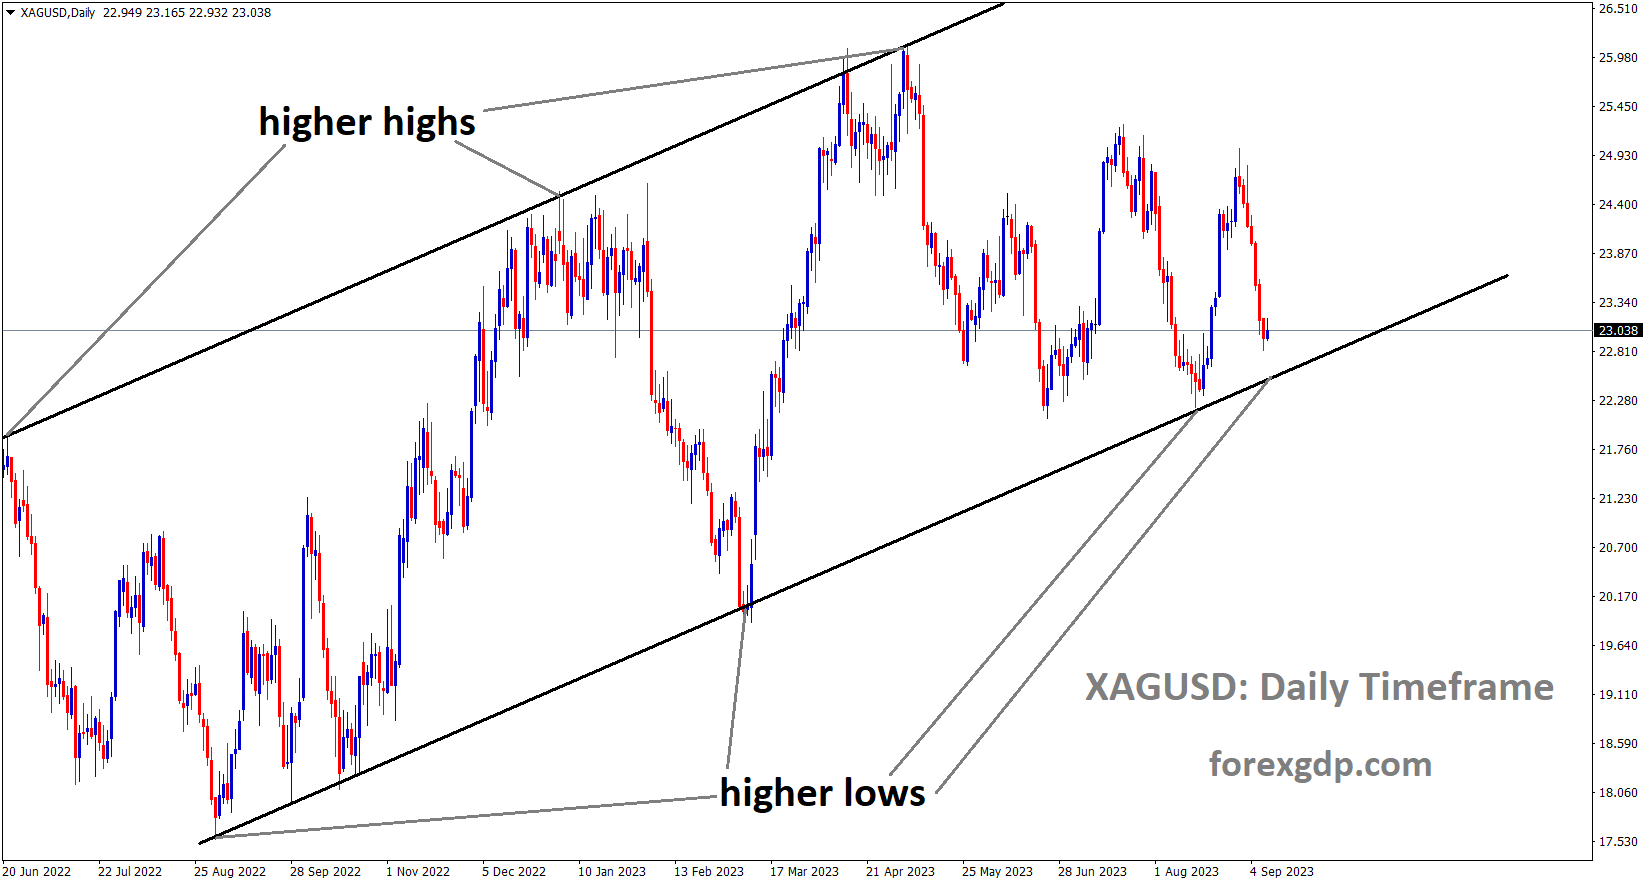 XAGUSD Silver price is moving in an ascending channel and the market has reached the higher low area of the channel